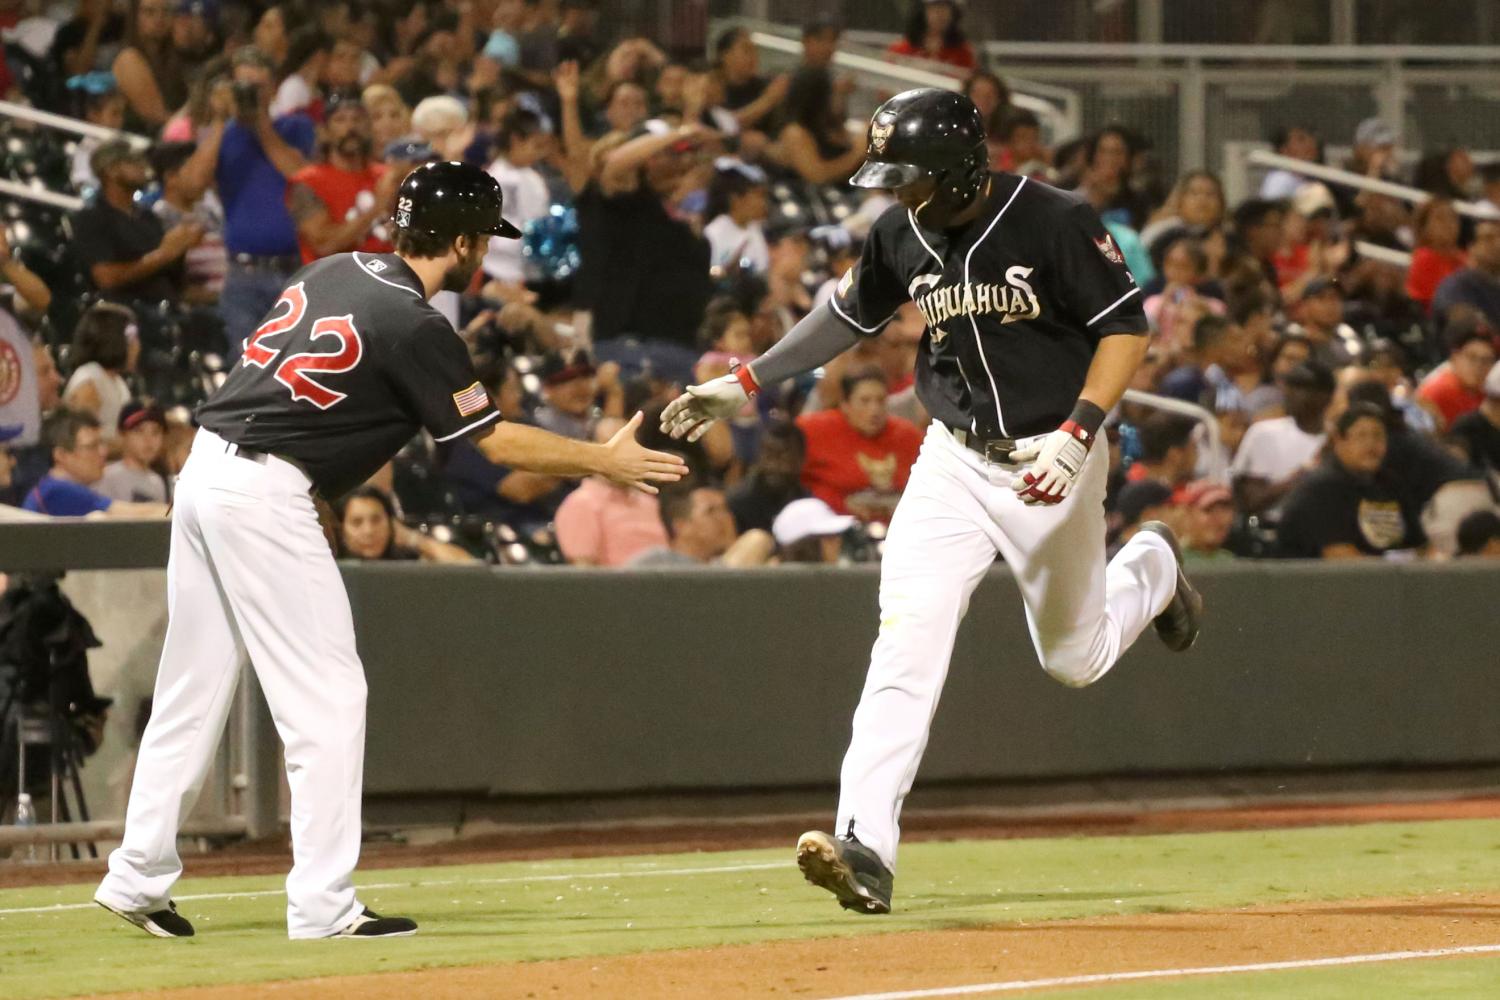 Chihuahuas beat Sacramento to clinch third straight division title